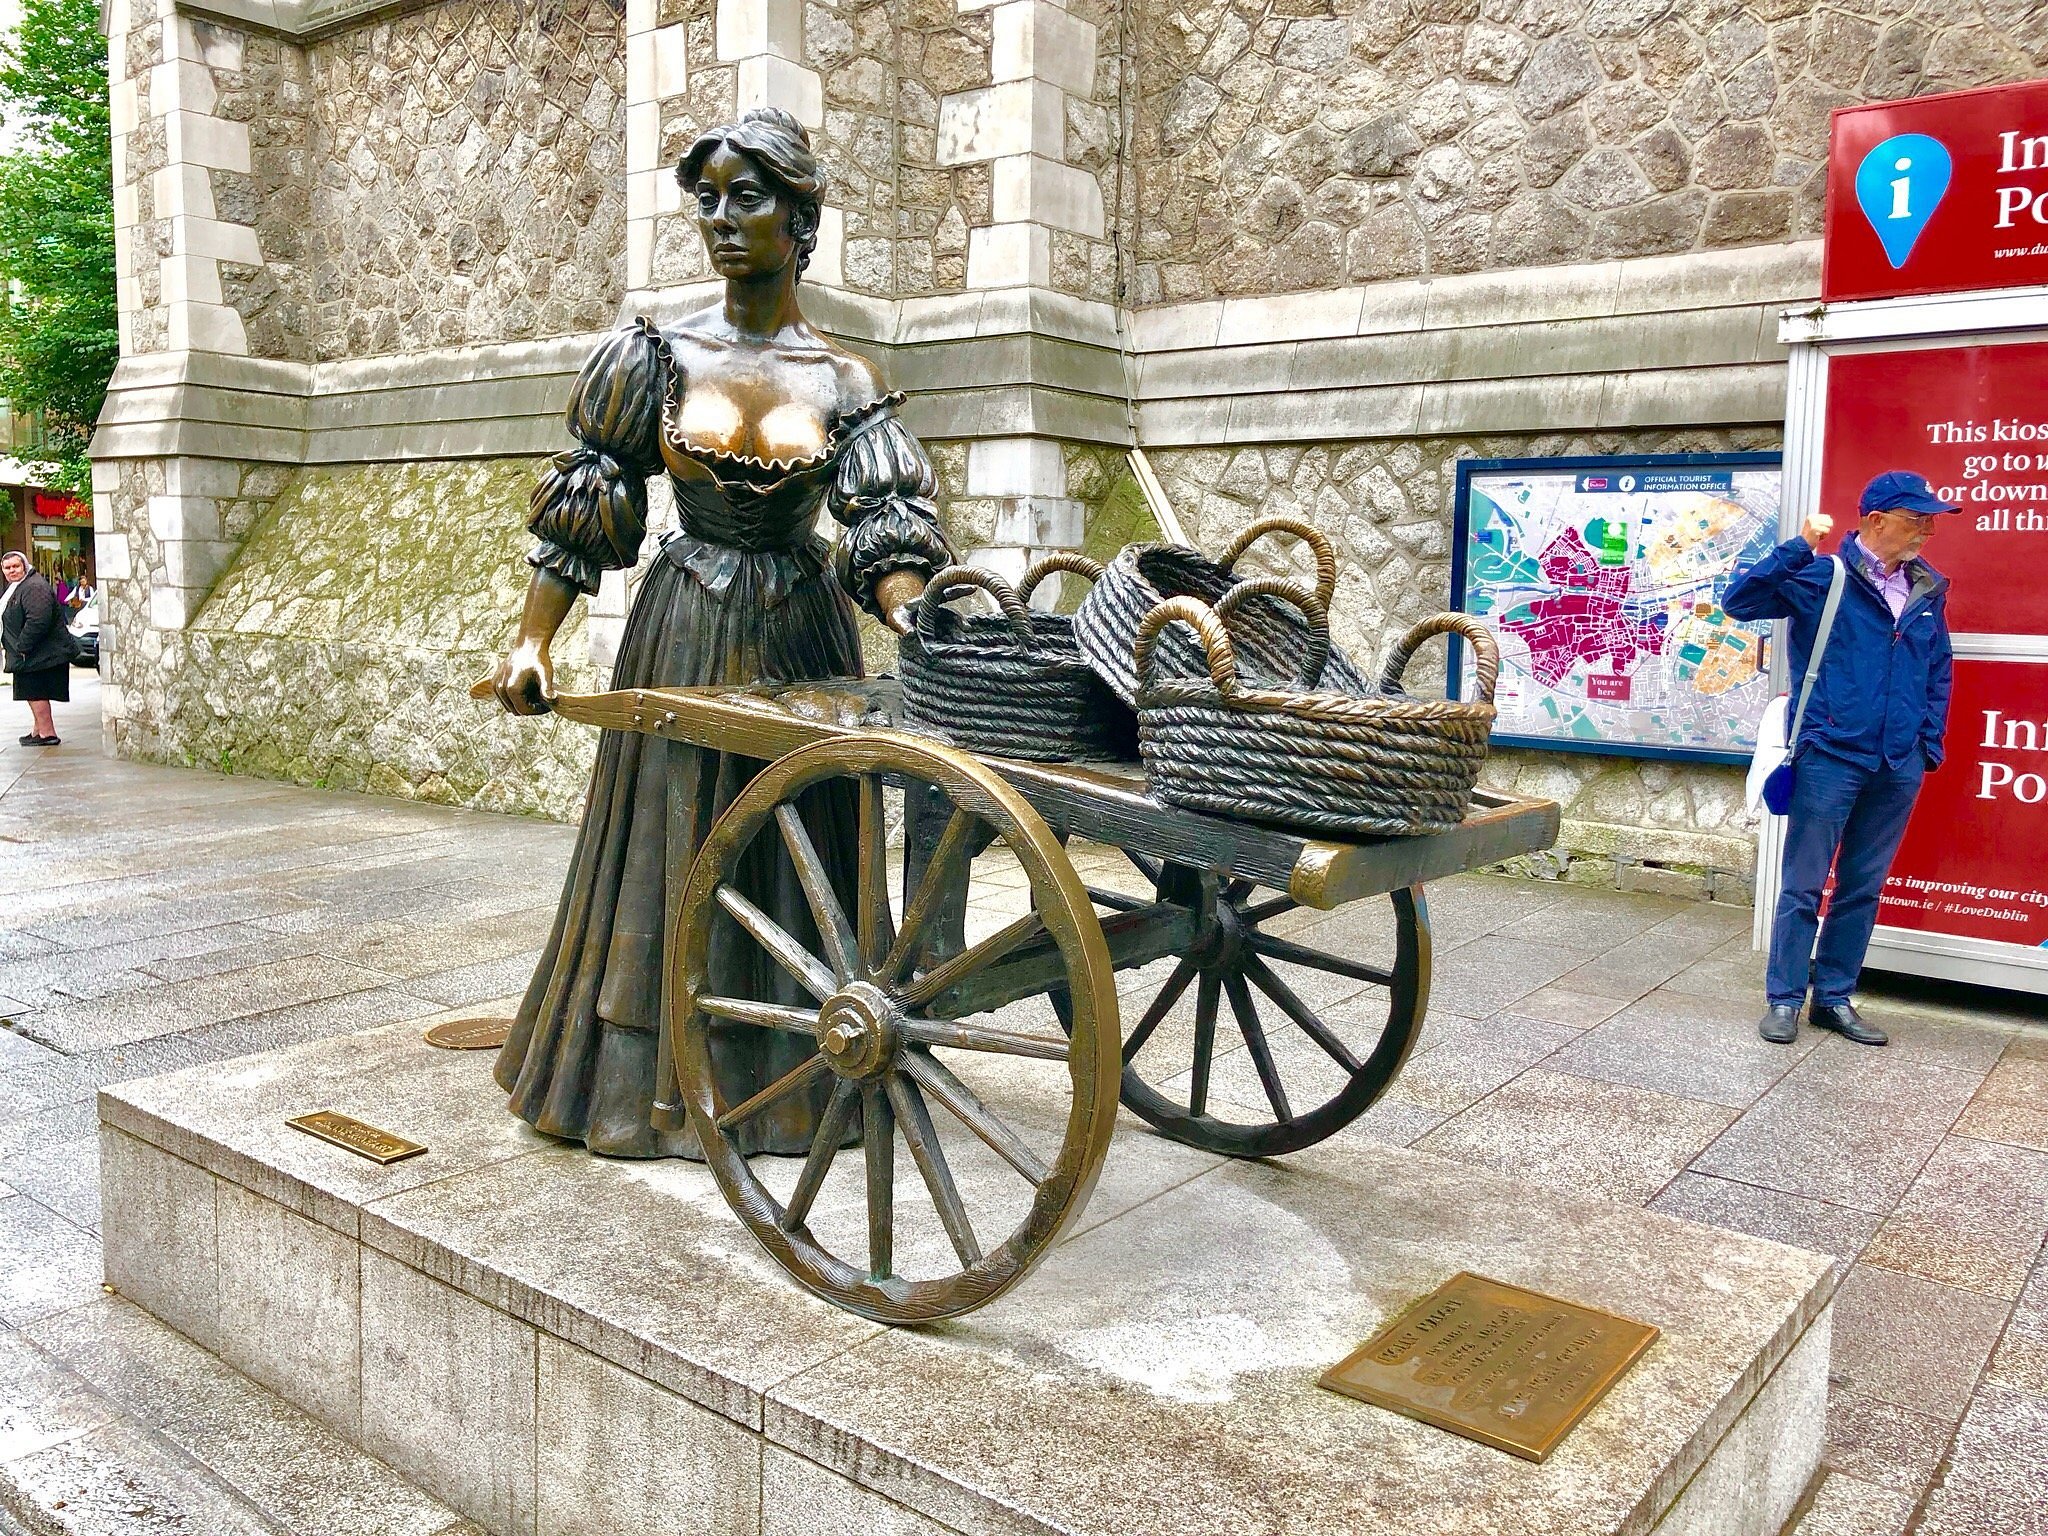 DUBLIN FREE WALKING TOUR - All You Need to Know BEFORE You Go